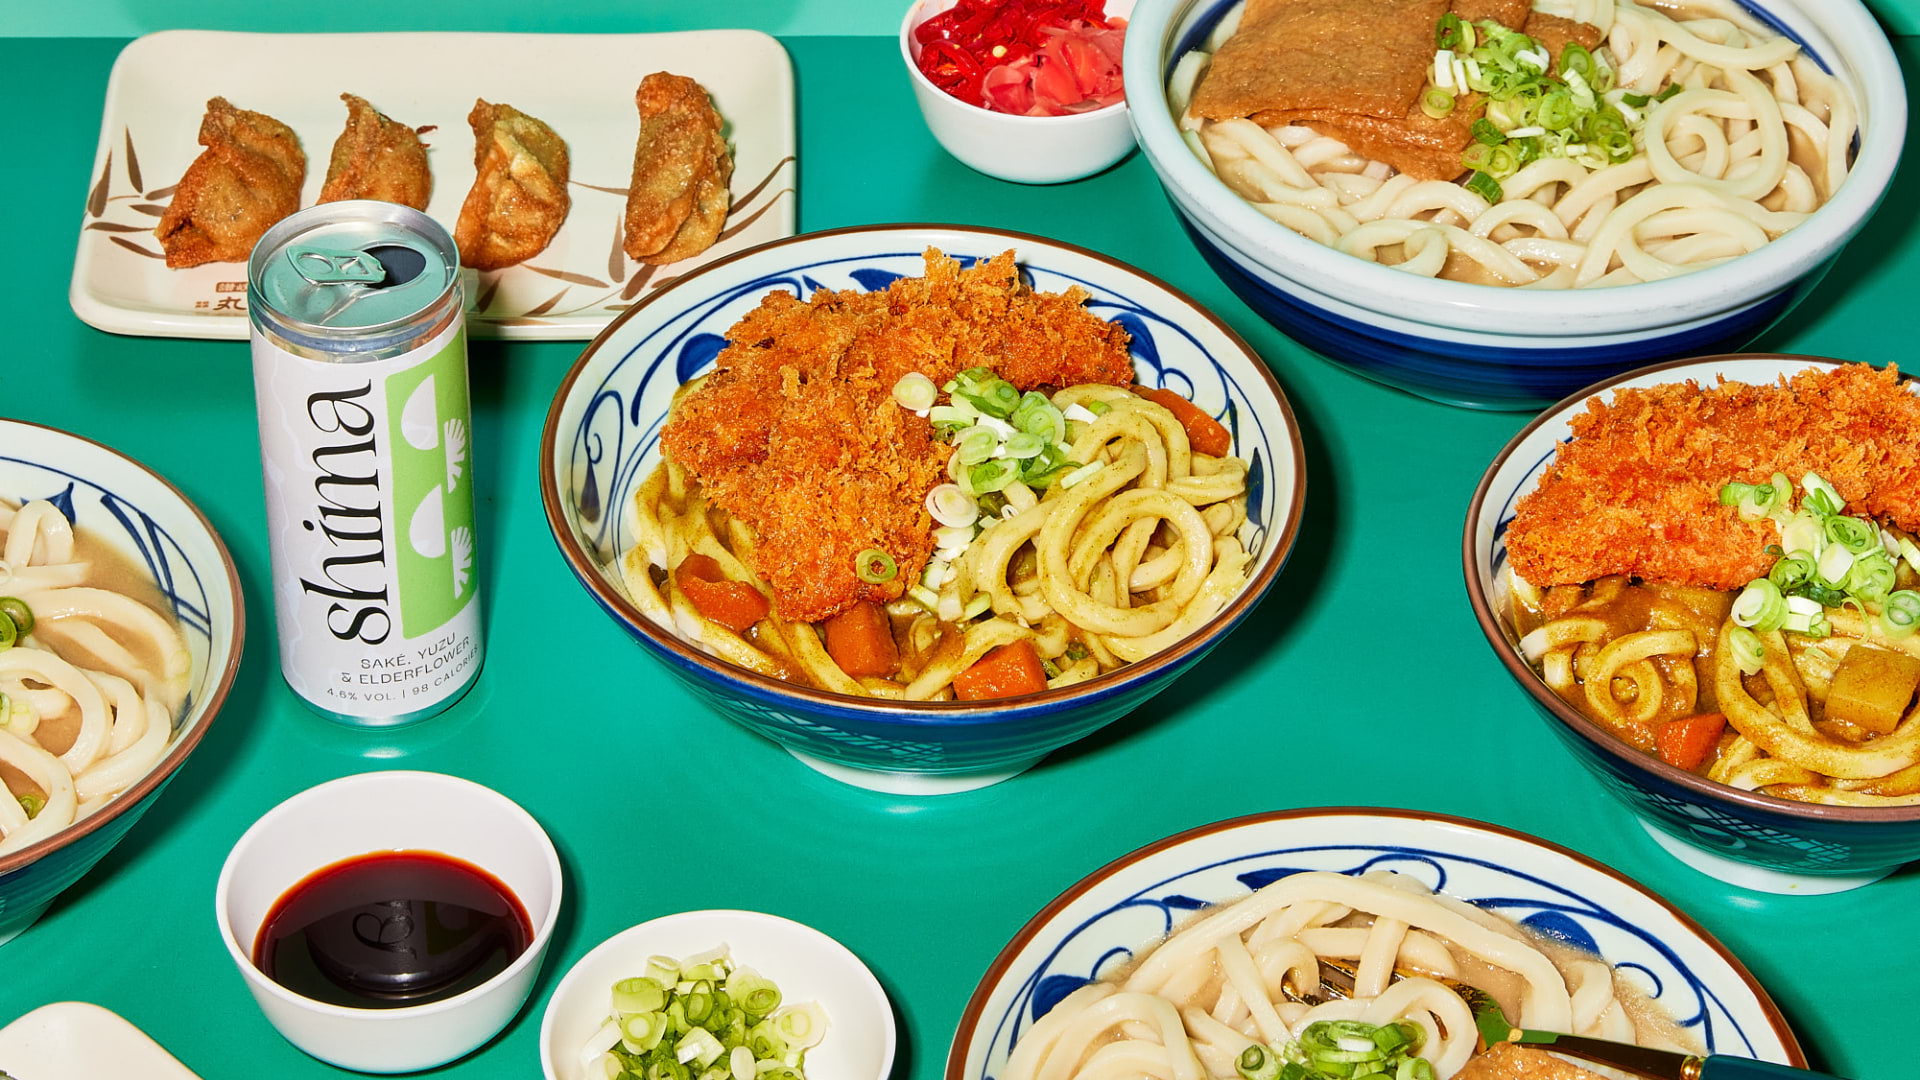 Marugame Udon brings Japanese flavours to Veganuary